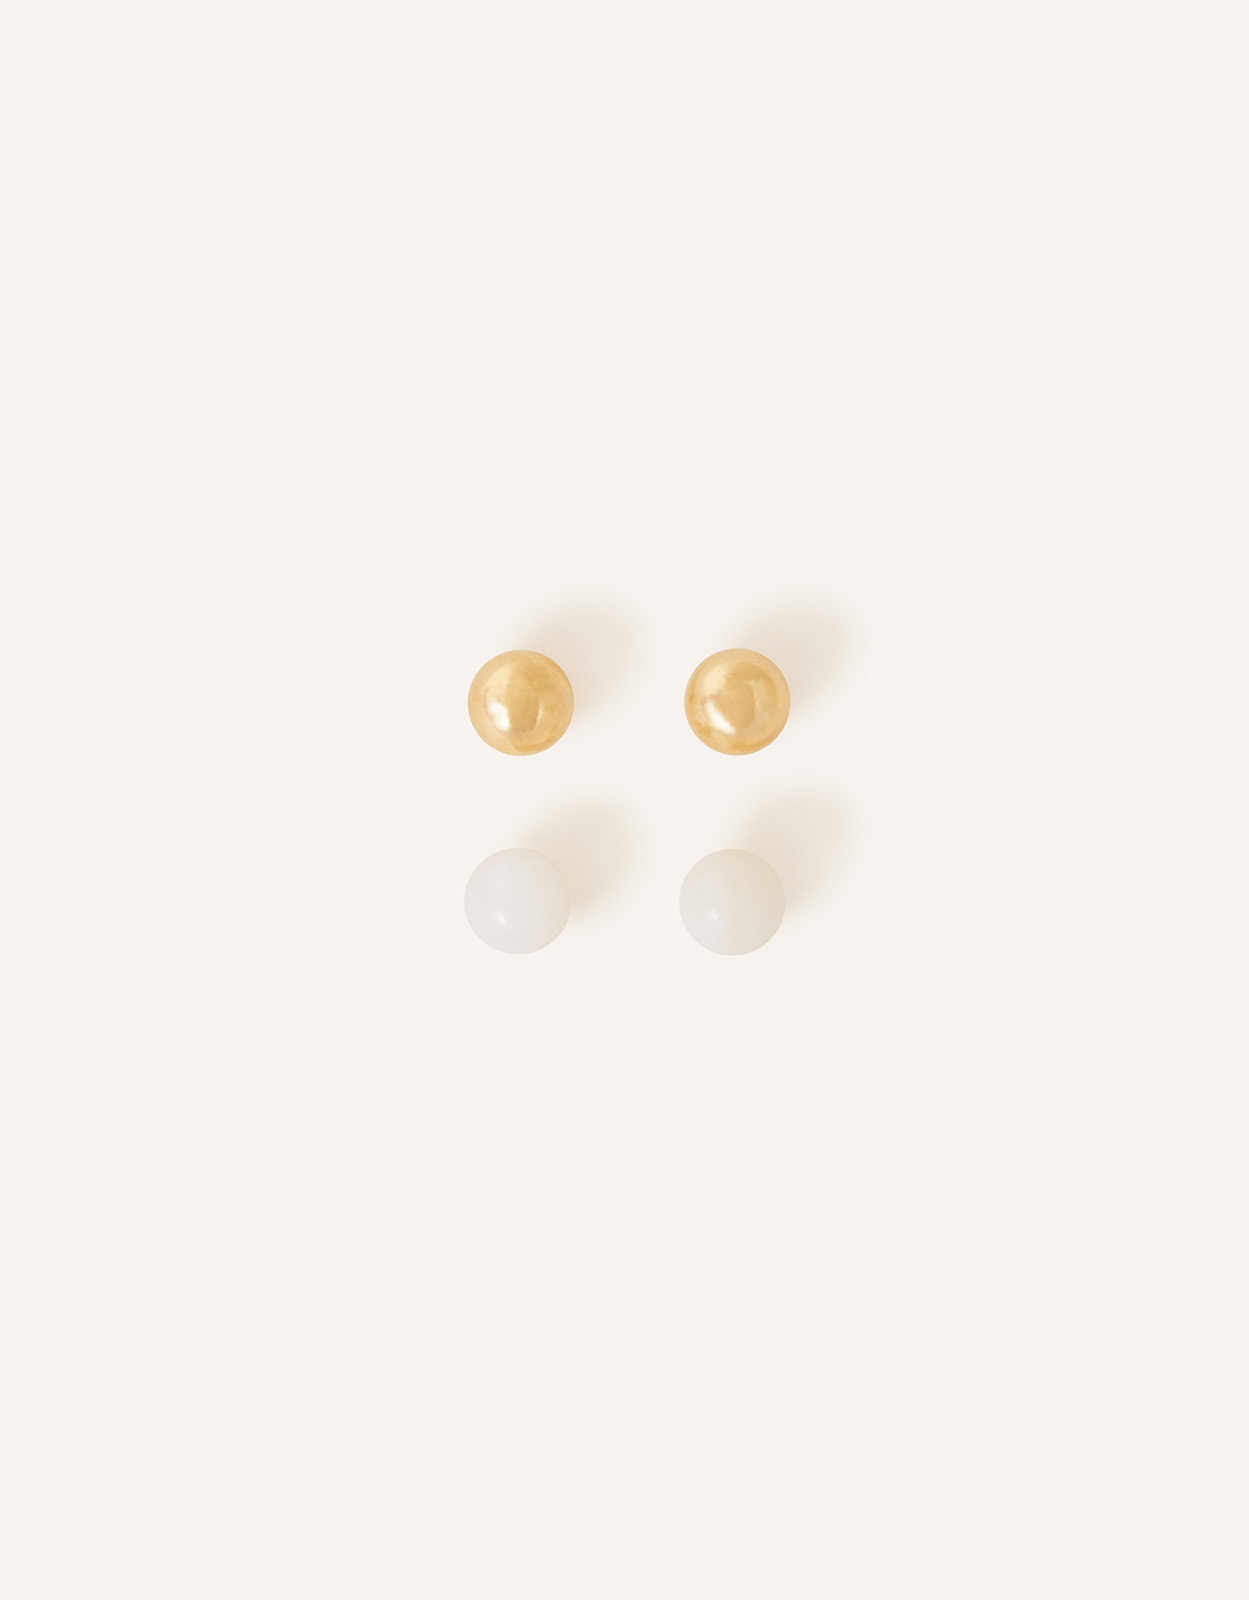 Accessorize Women's 14ct Gold-Plated Pearl and Plain Stud Earrings Set of Two